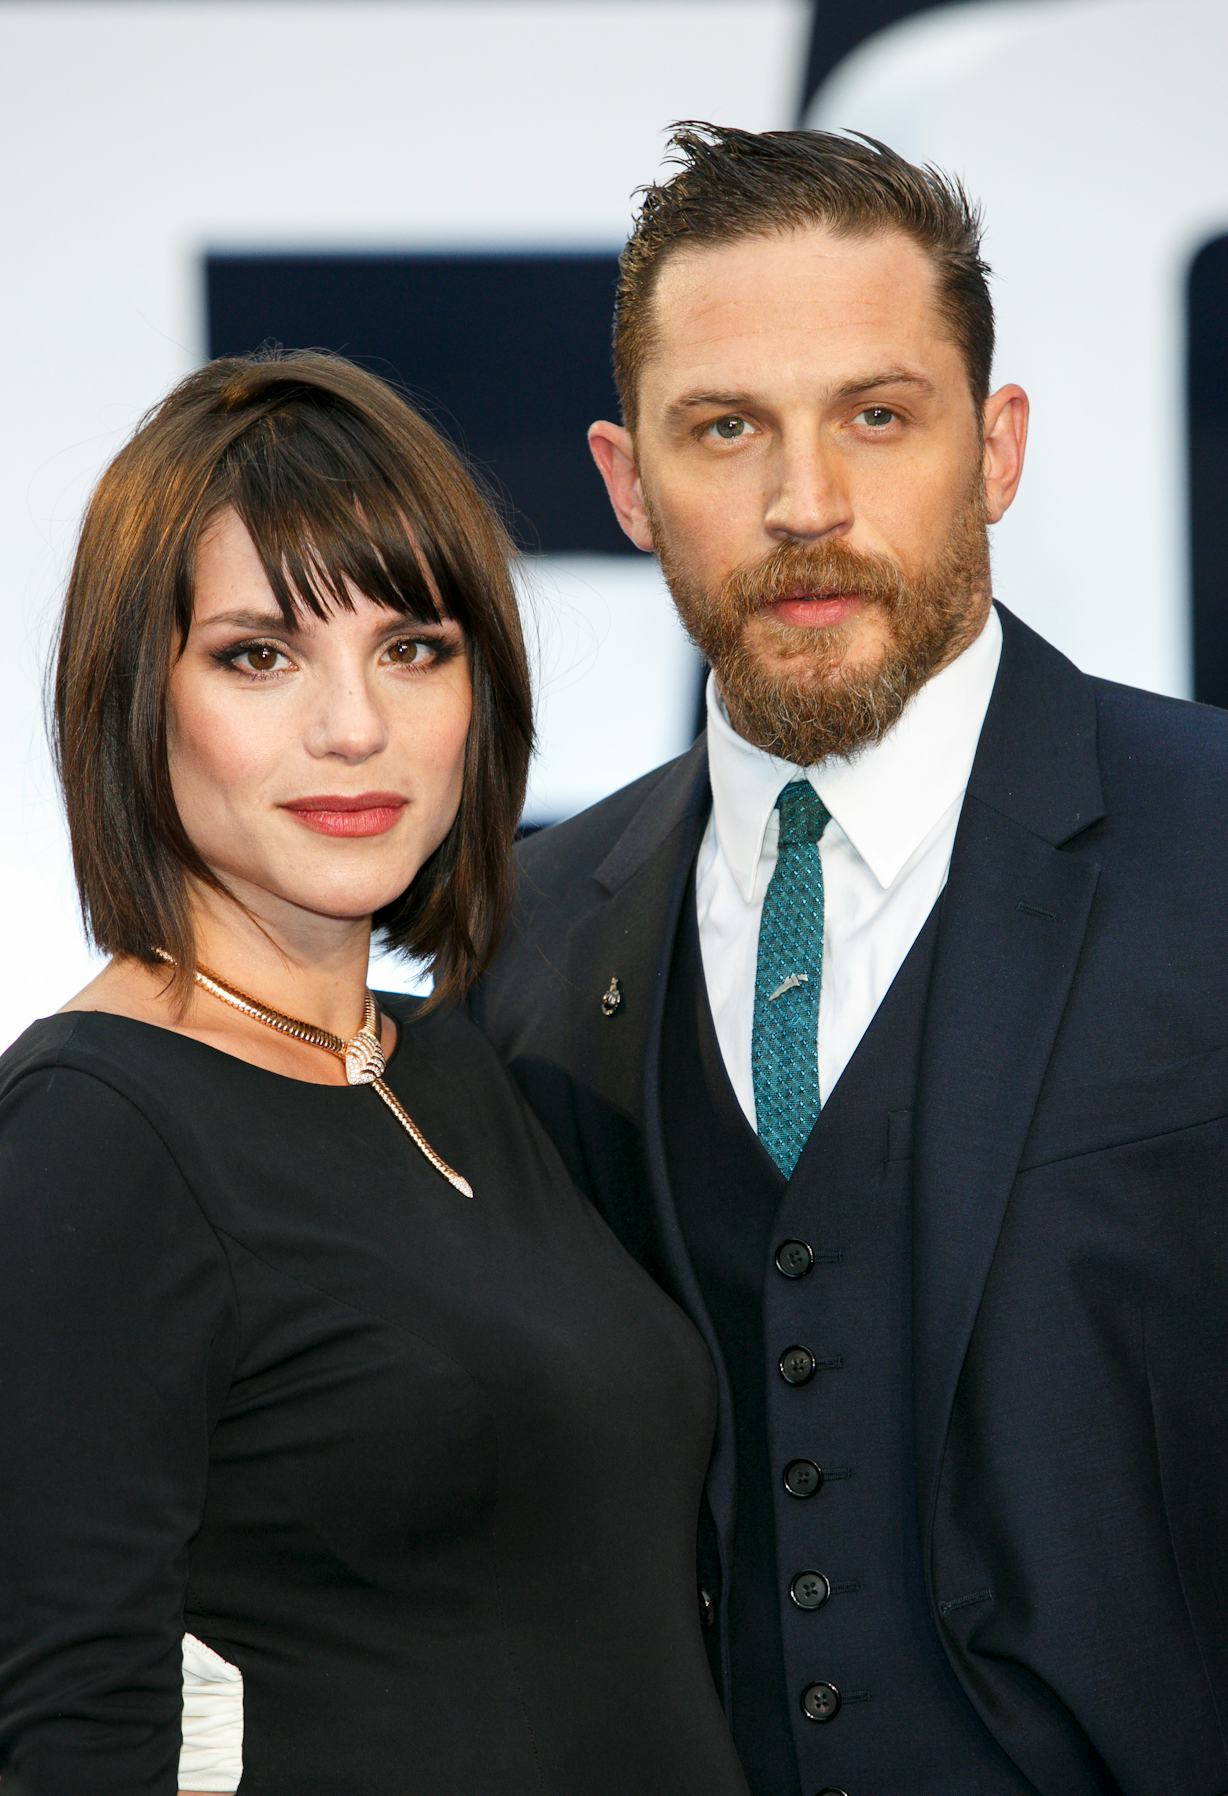 Photos Of Tom Hardy & Wife Charlotte Riley Prove They're Going To Be The Most Adorbs Couple At